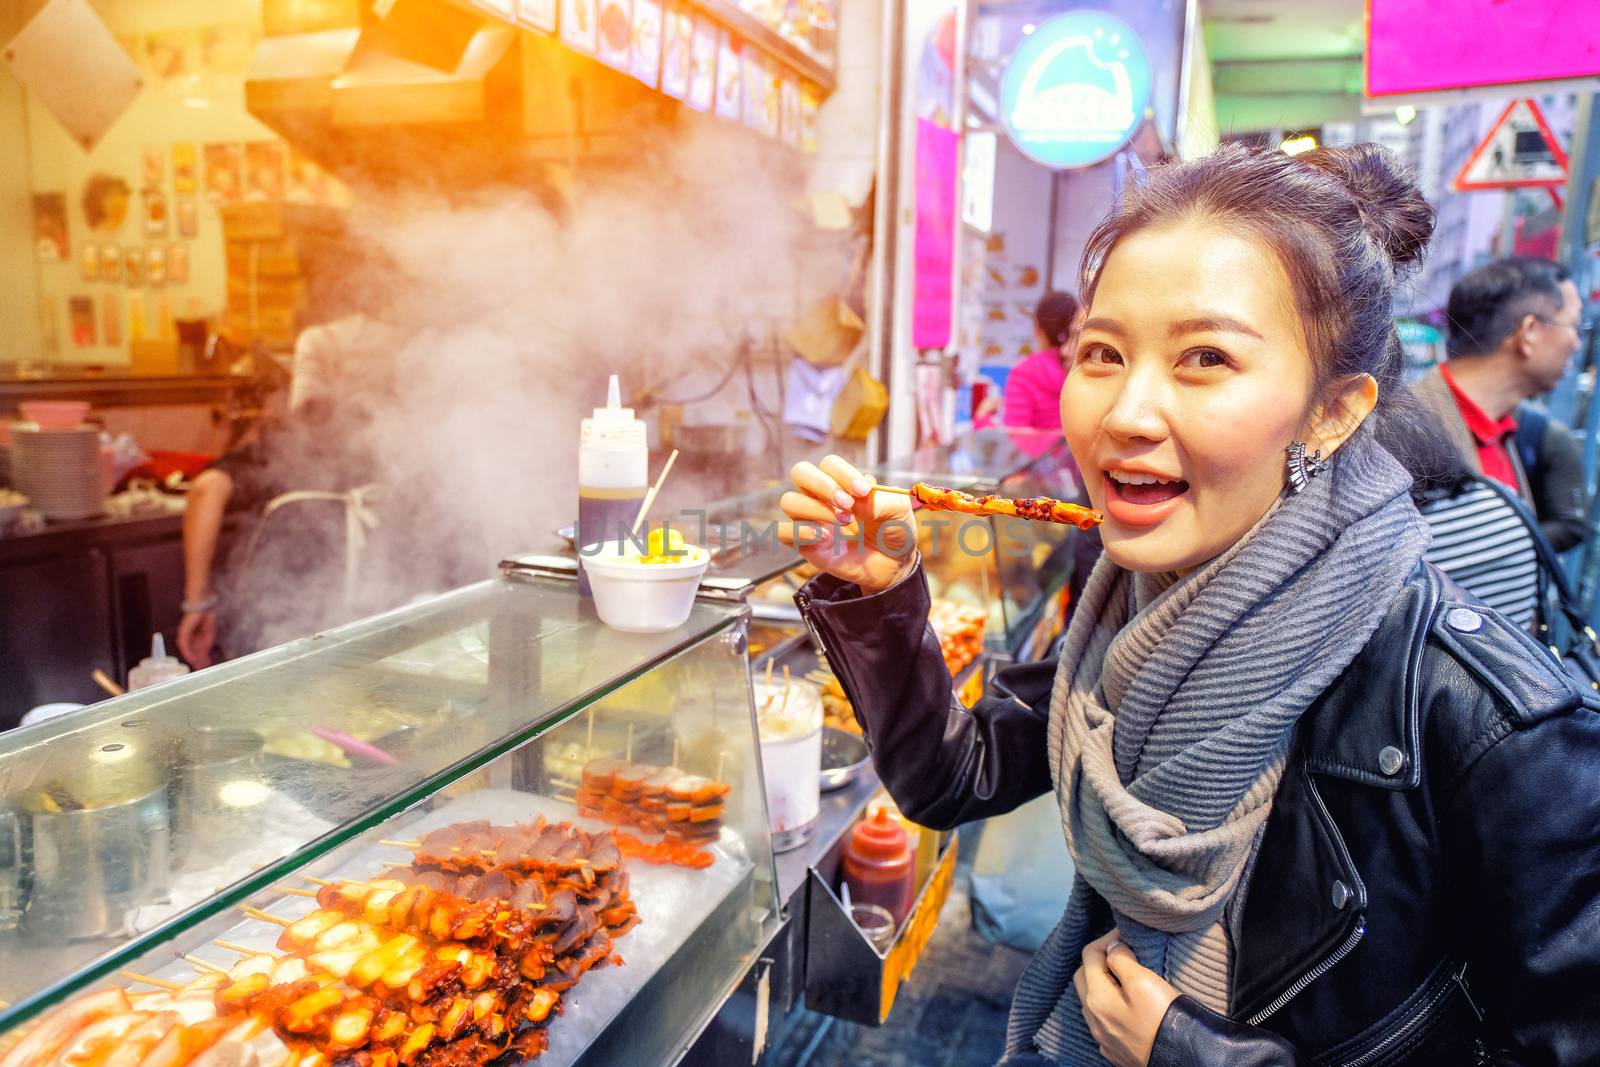 Chinese Asian young female model eating Grilled octopus on Street in Hong Kong